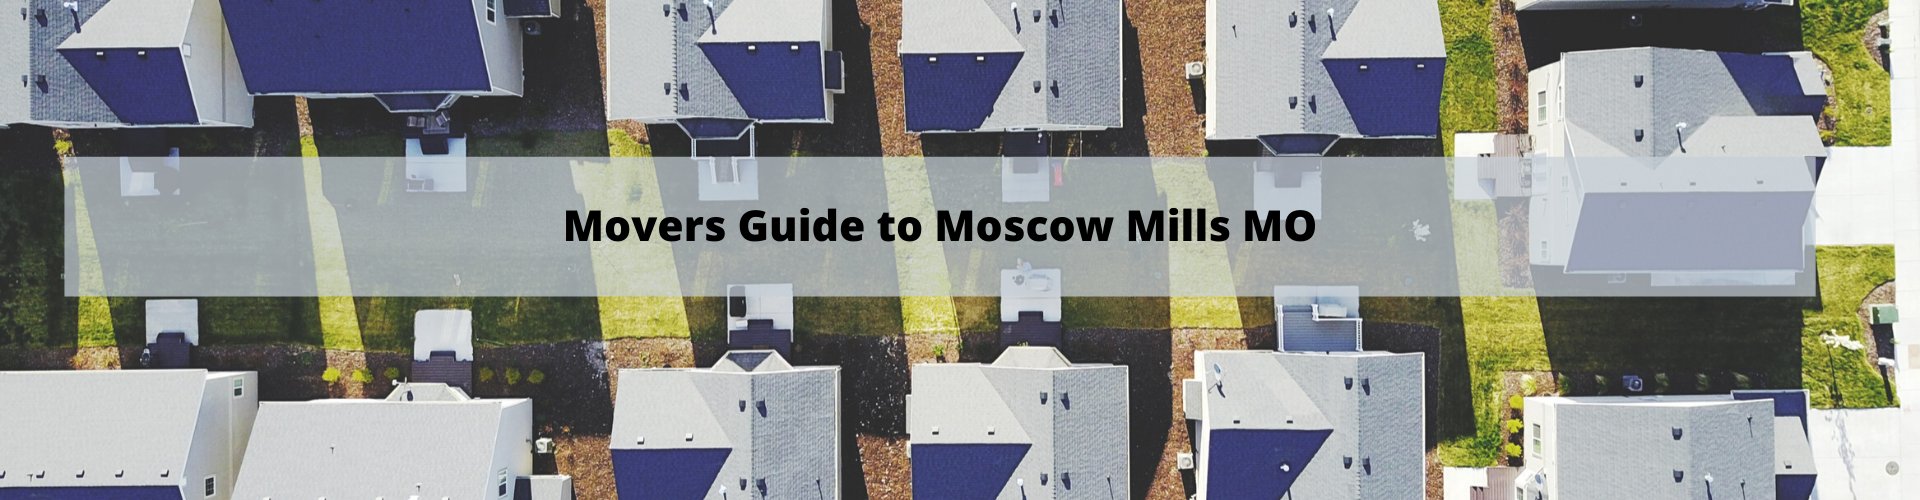 Movers Guide to Moscow Mills MO